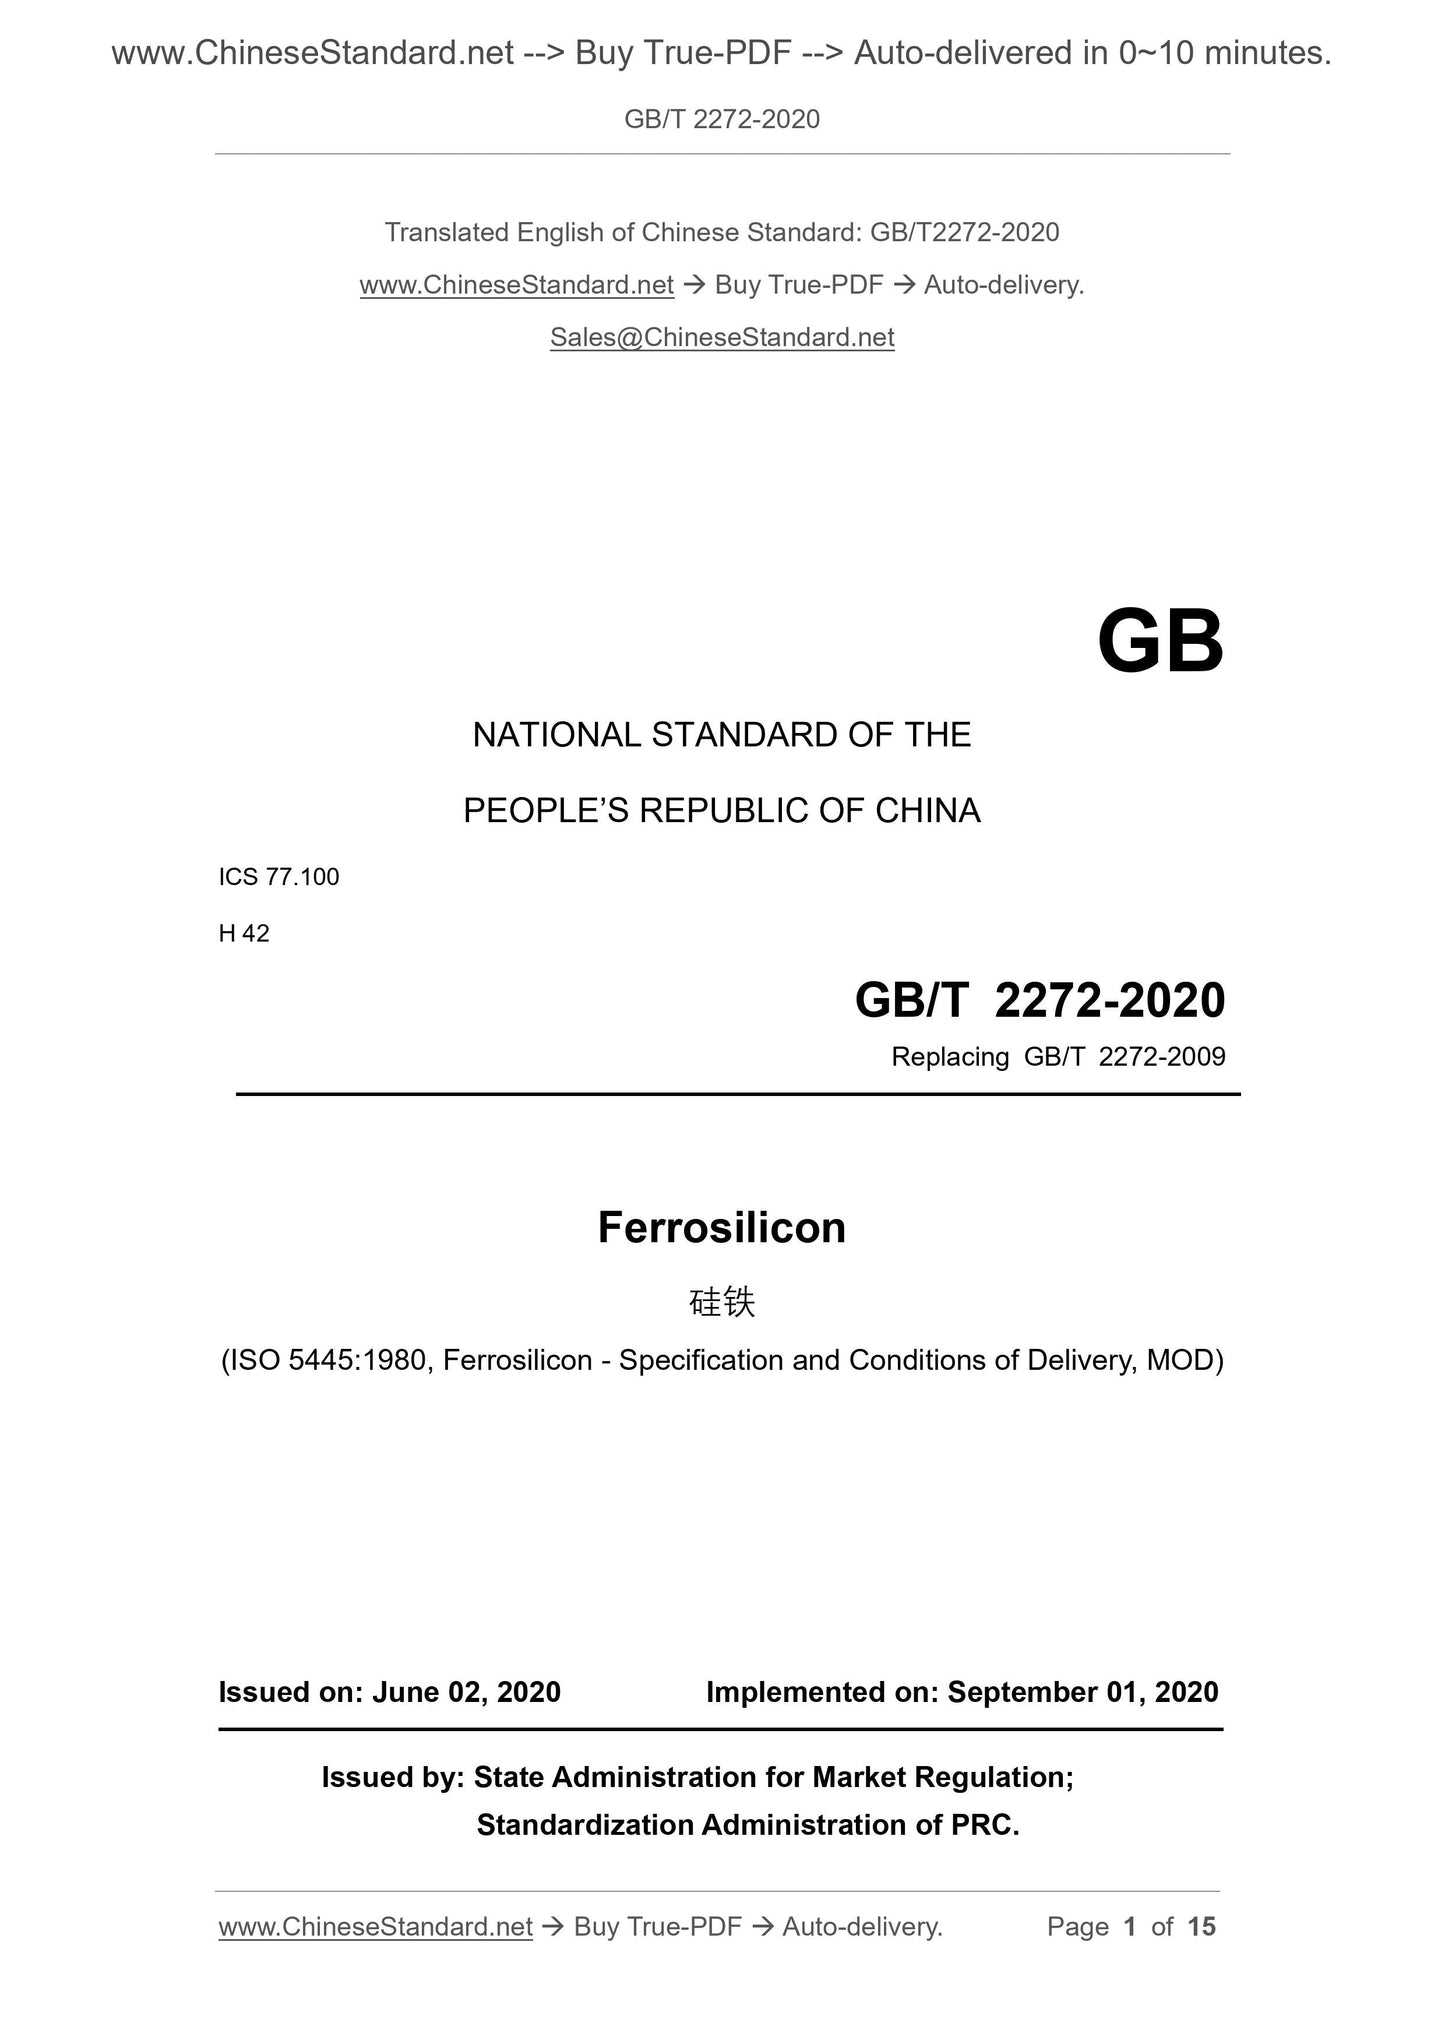 GB/T 2272-2020 Page 1